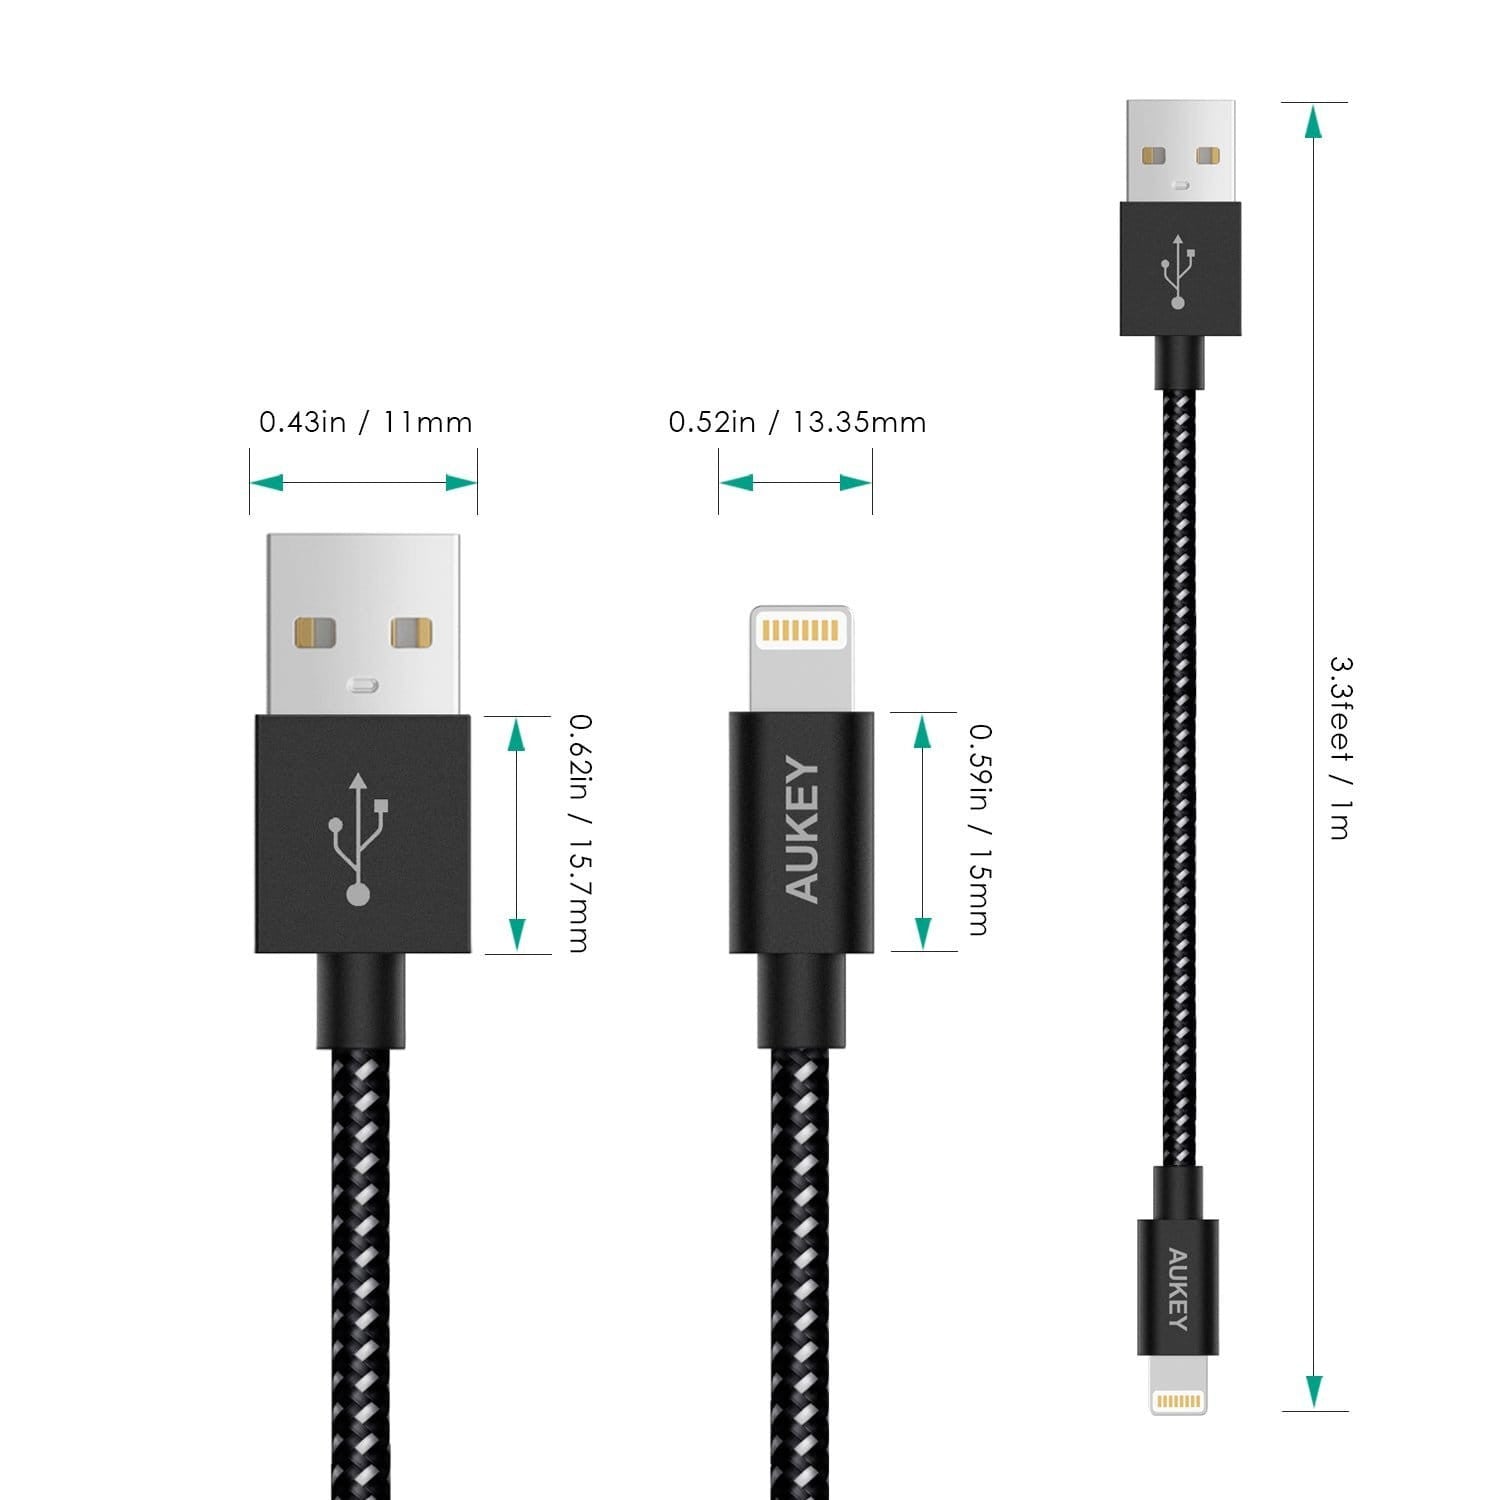 Aukey CB-D16 Apple cable dimension and lenght